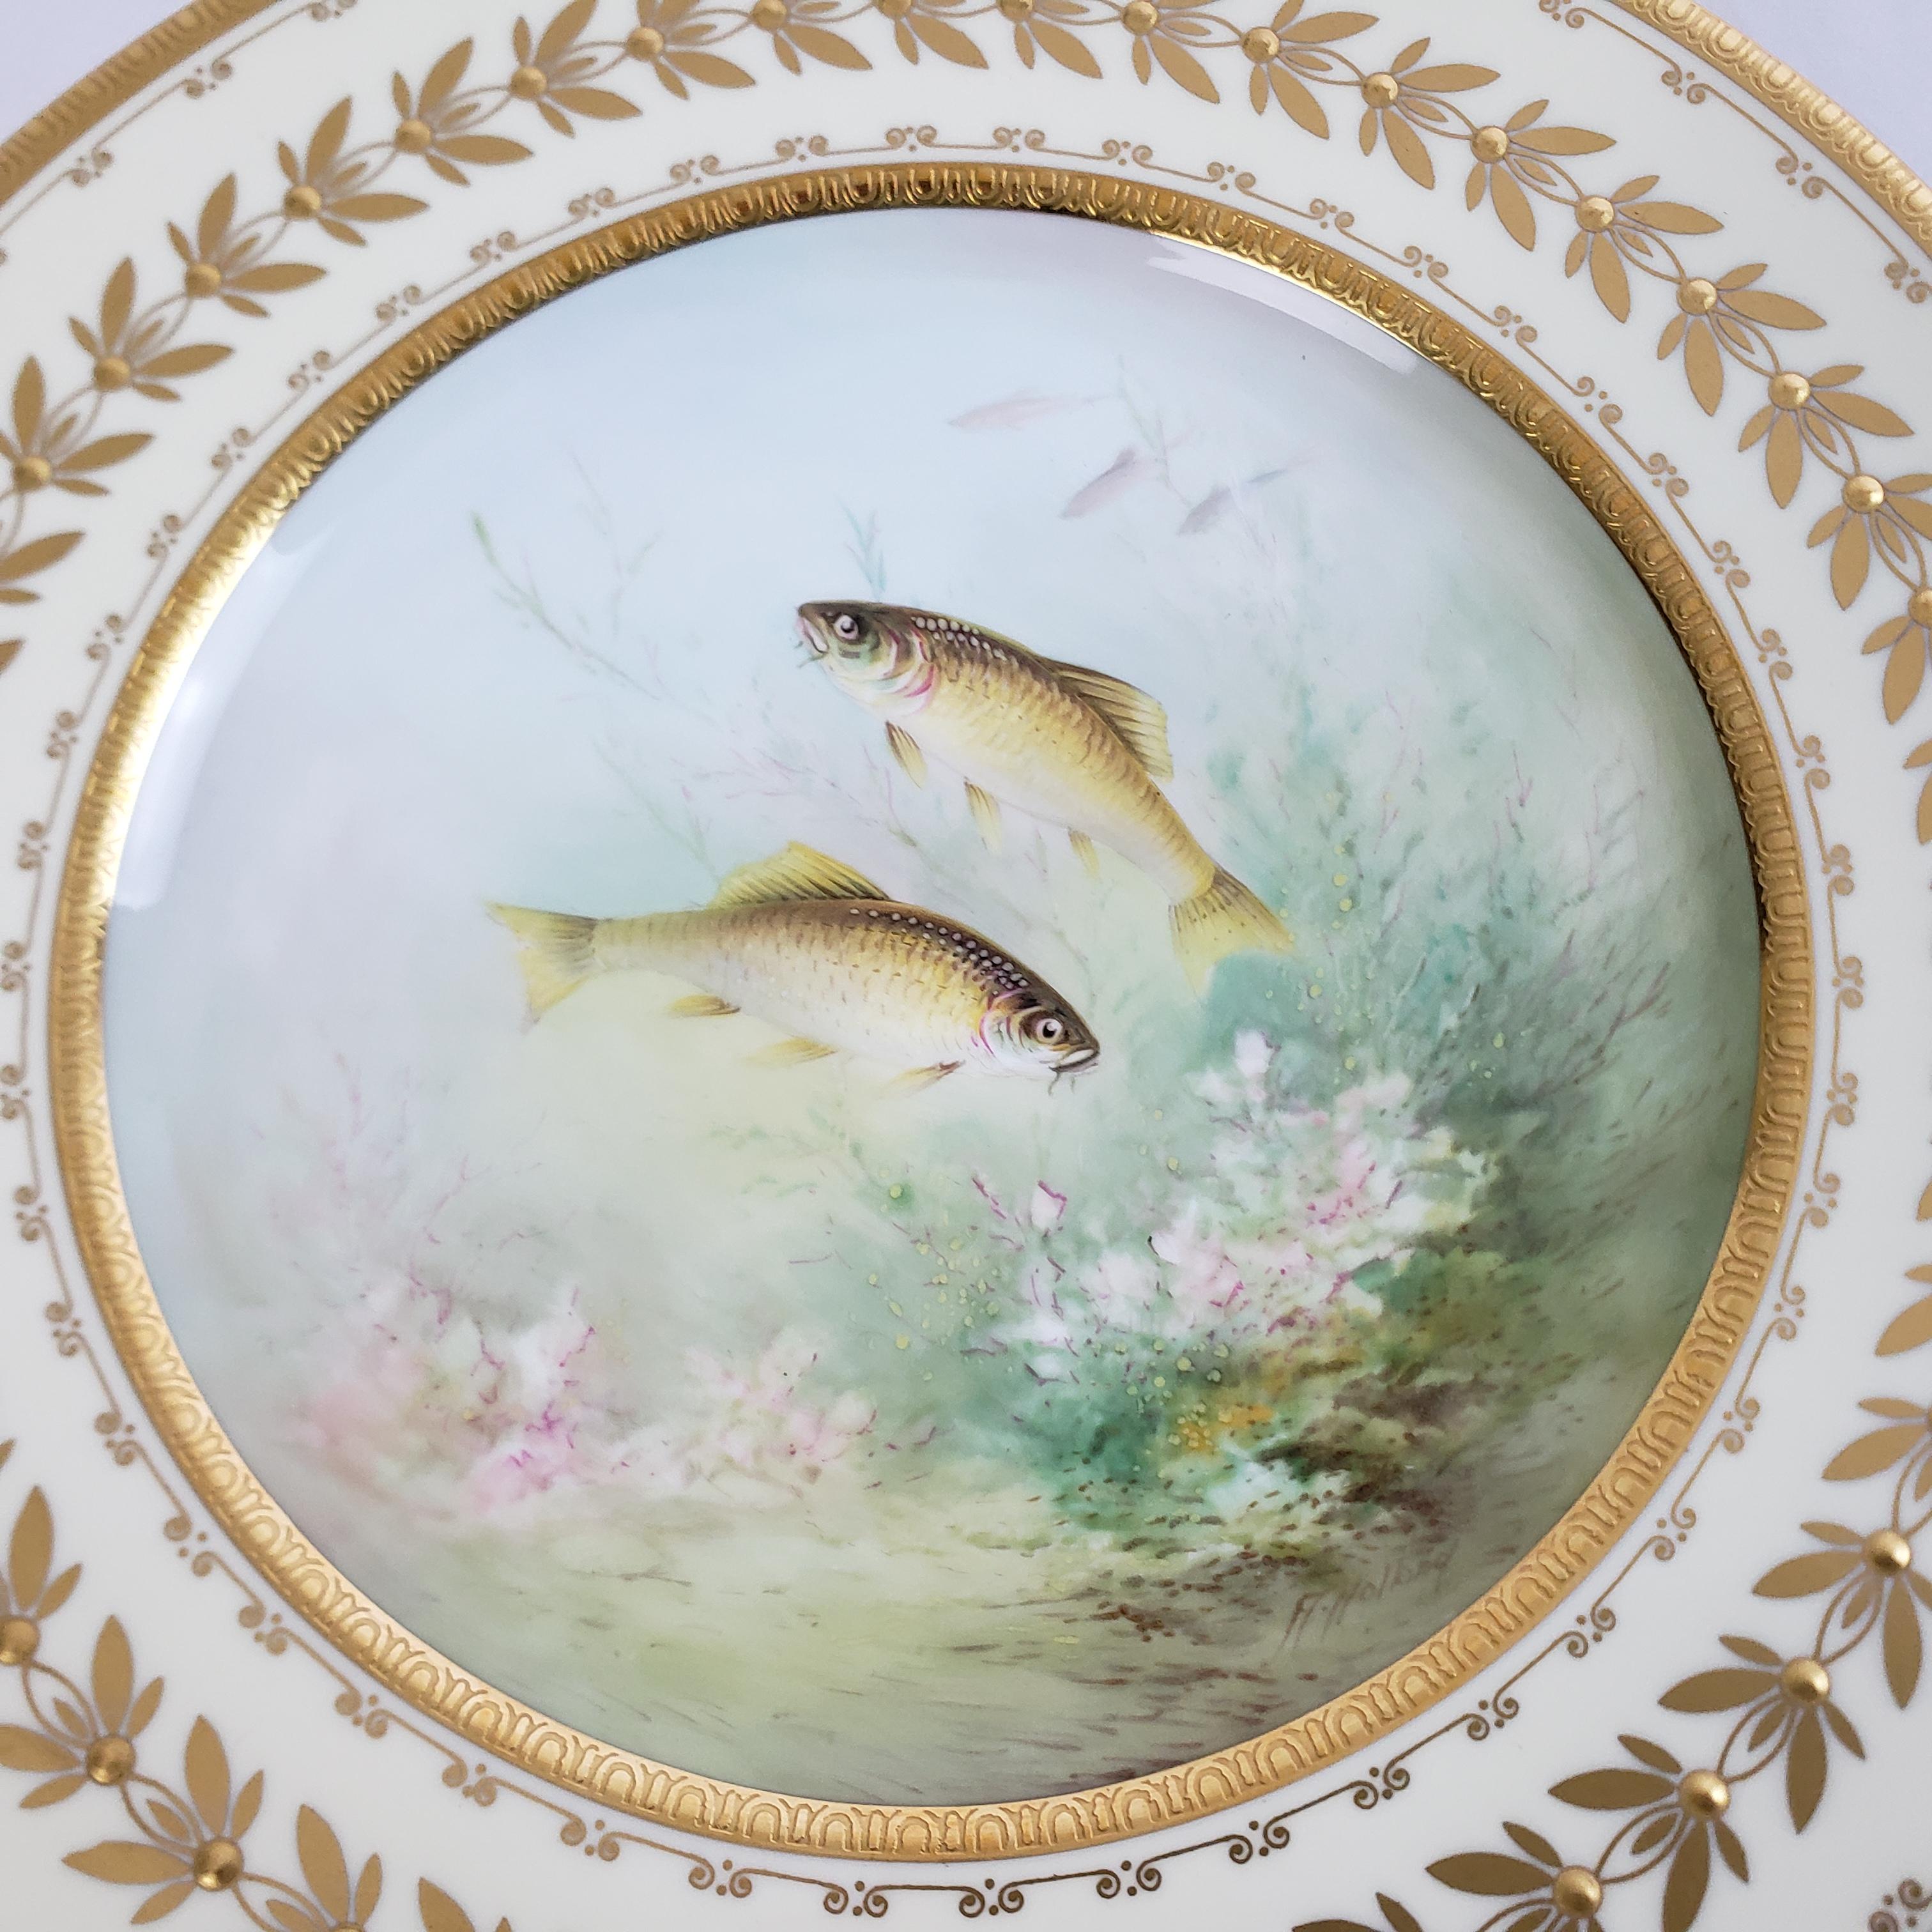 12 Antique Minton Hand-Painted Cabinet Plates Signed A. Holland Depicting Fish For Sale 8